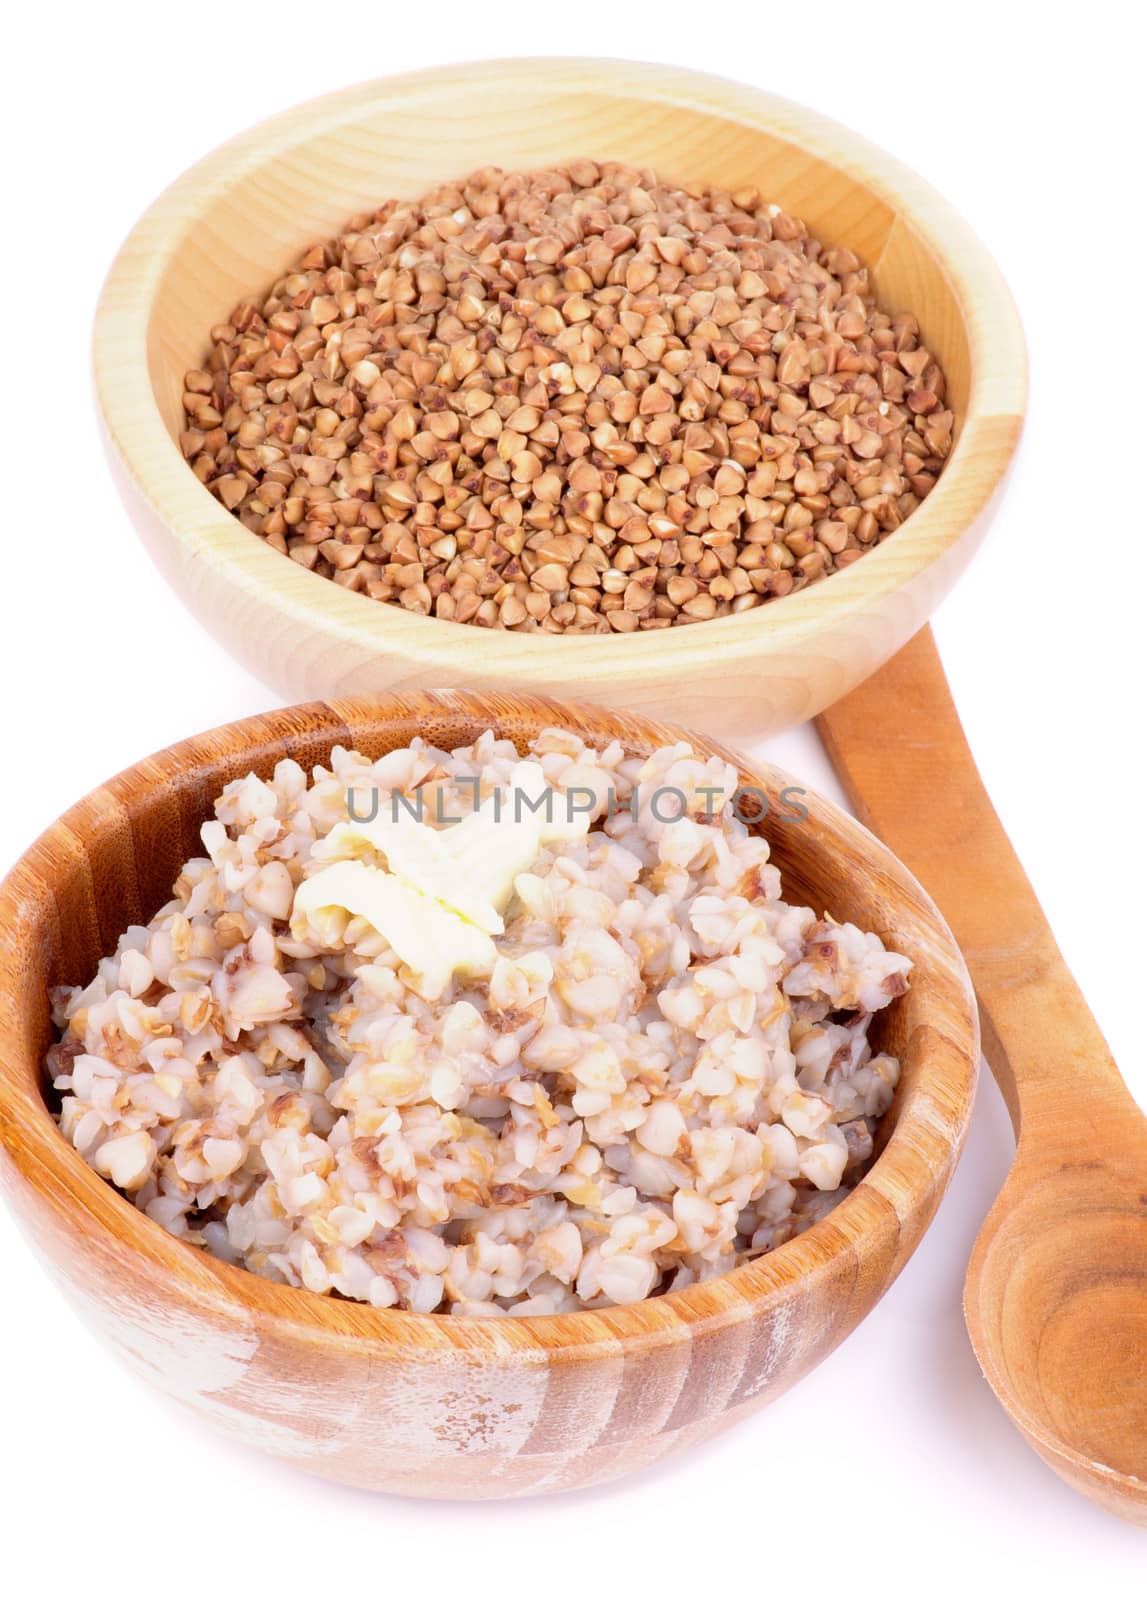 Arrangement of Traditional Russian Buckwheat Kasha with Buckwheat in Wooden Bowl and Wooden Spoon isolated on white background